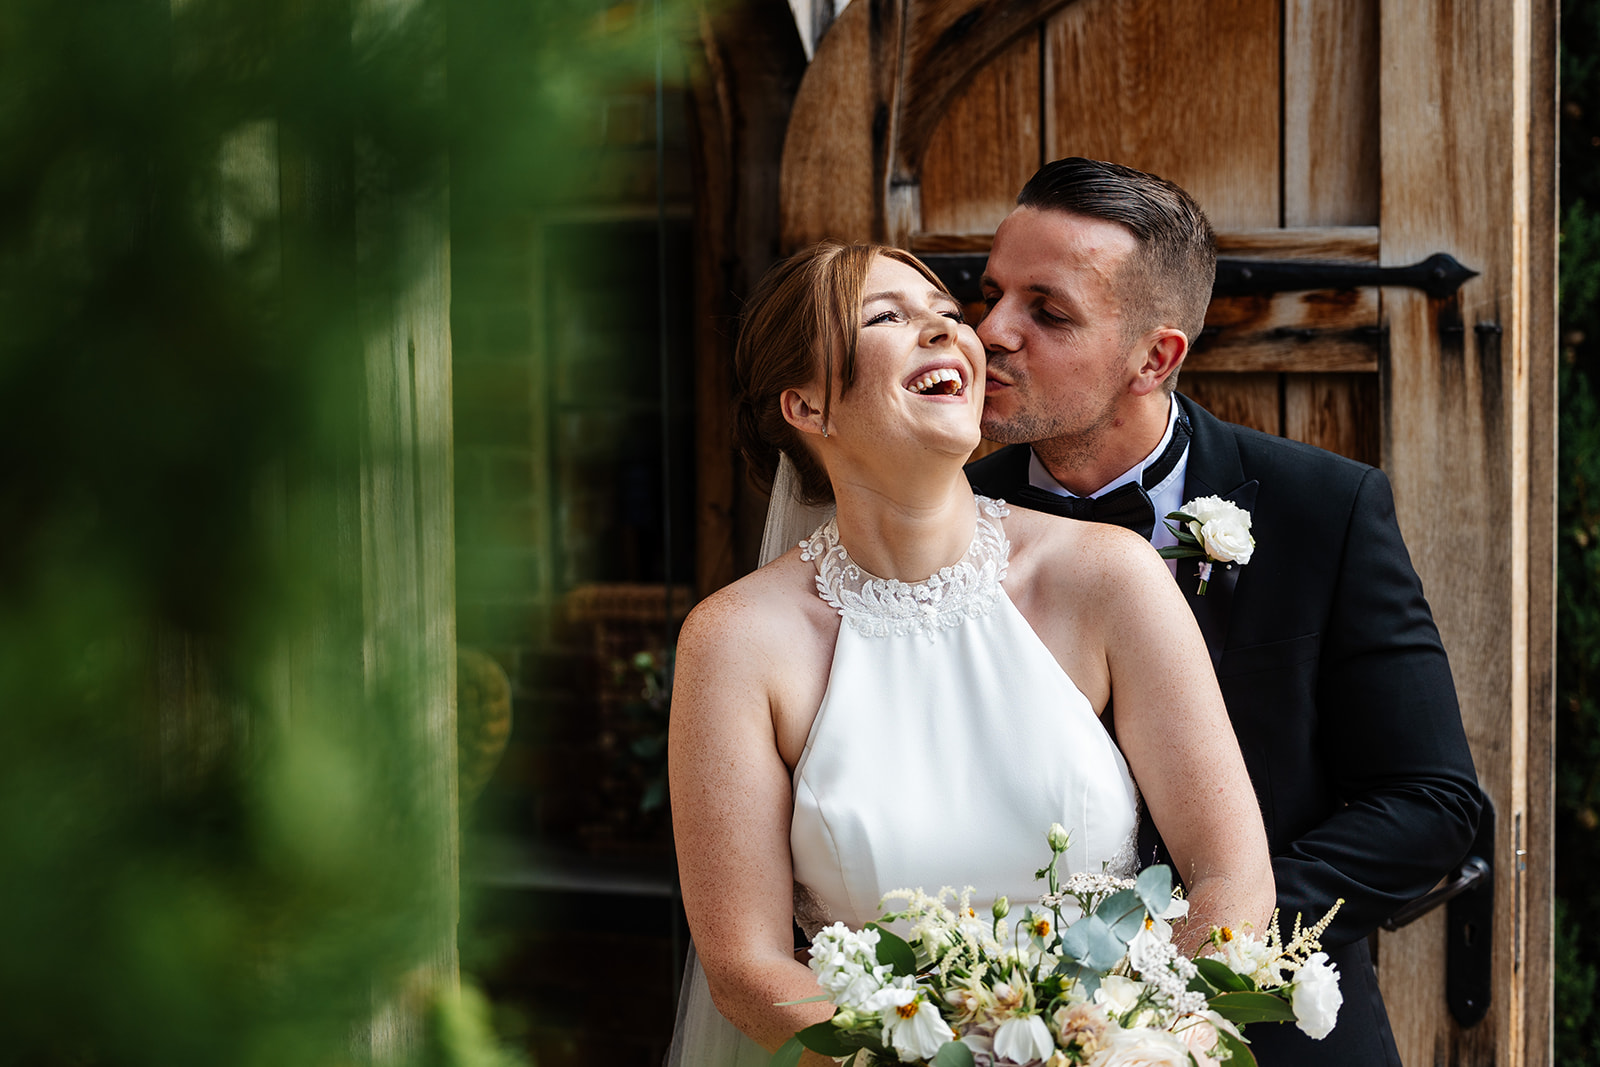 Groom gives bride a kiss on the cheek, they are outside in front of a large wooden door, she is smiling 